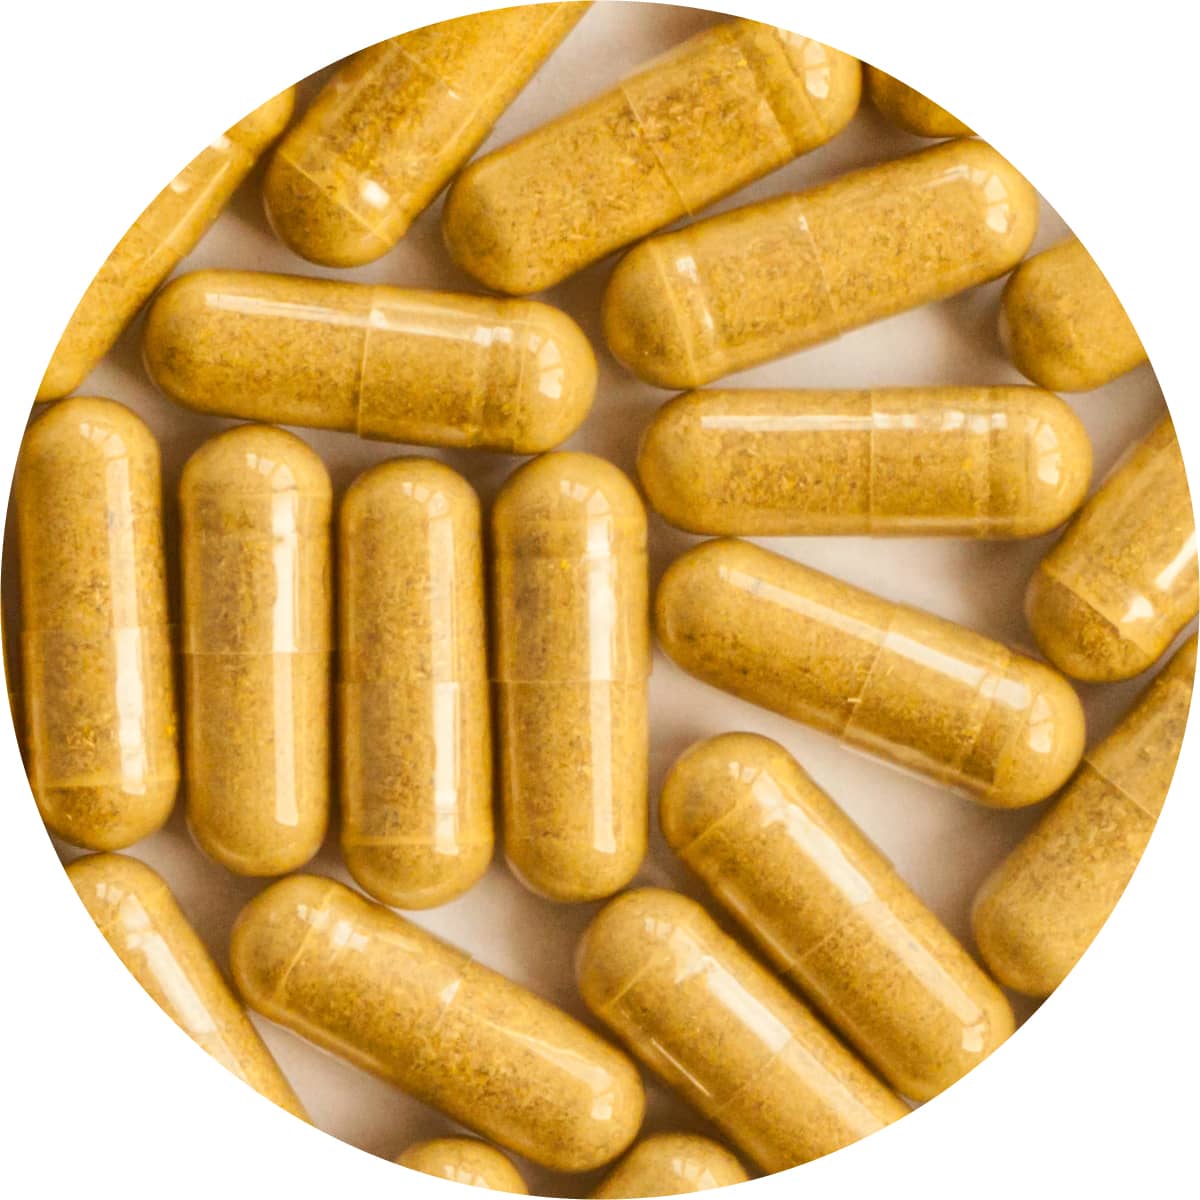 Shop for herbal supplements